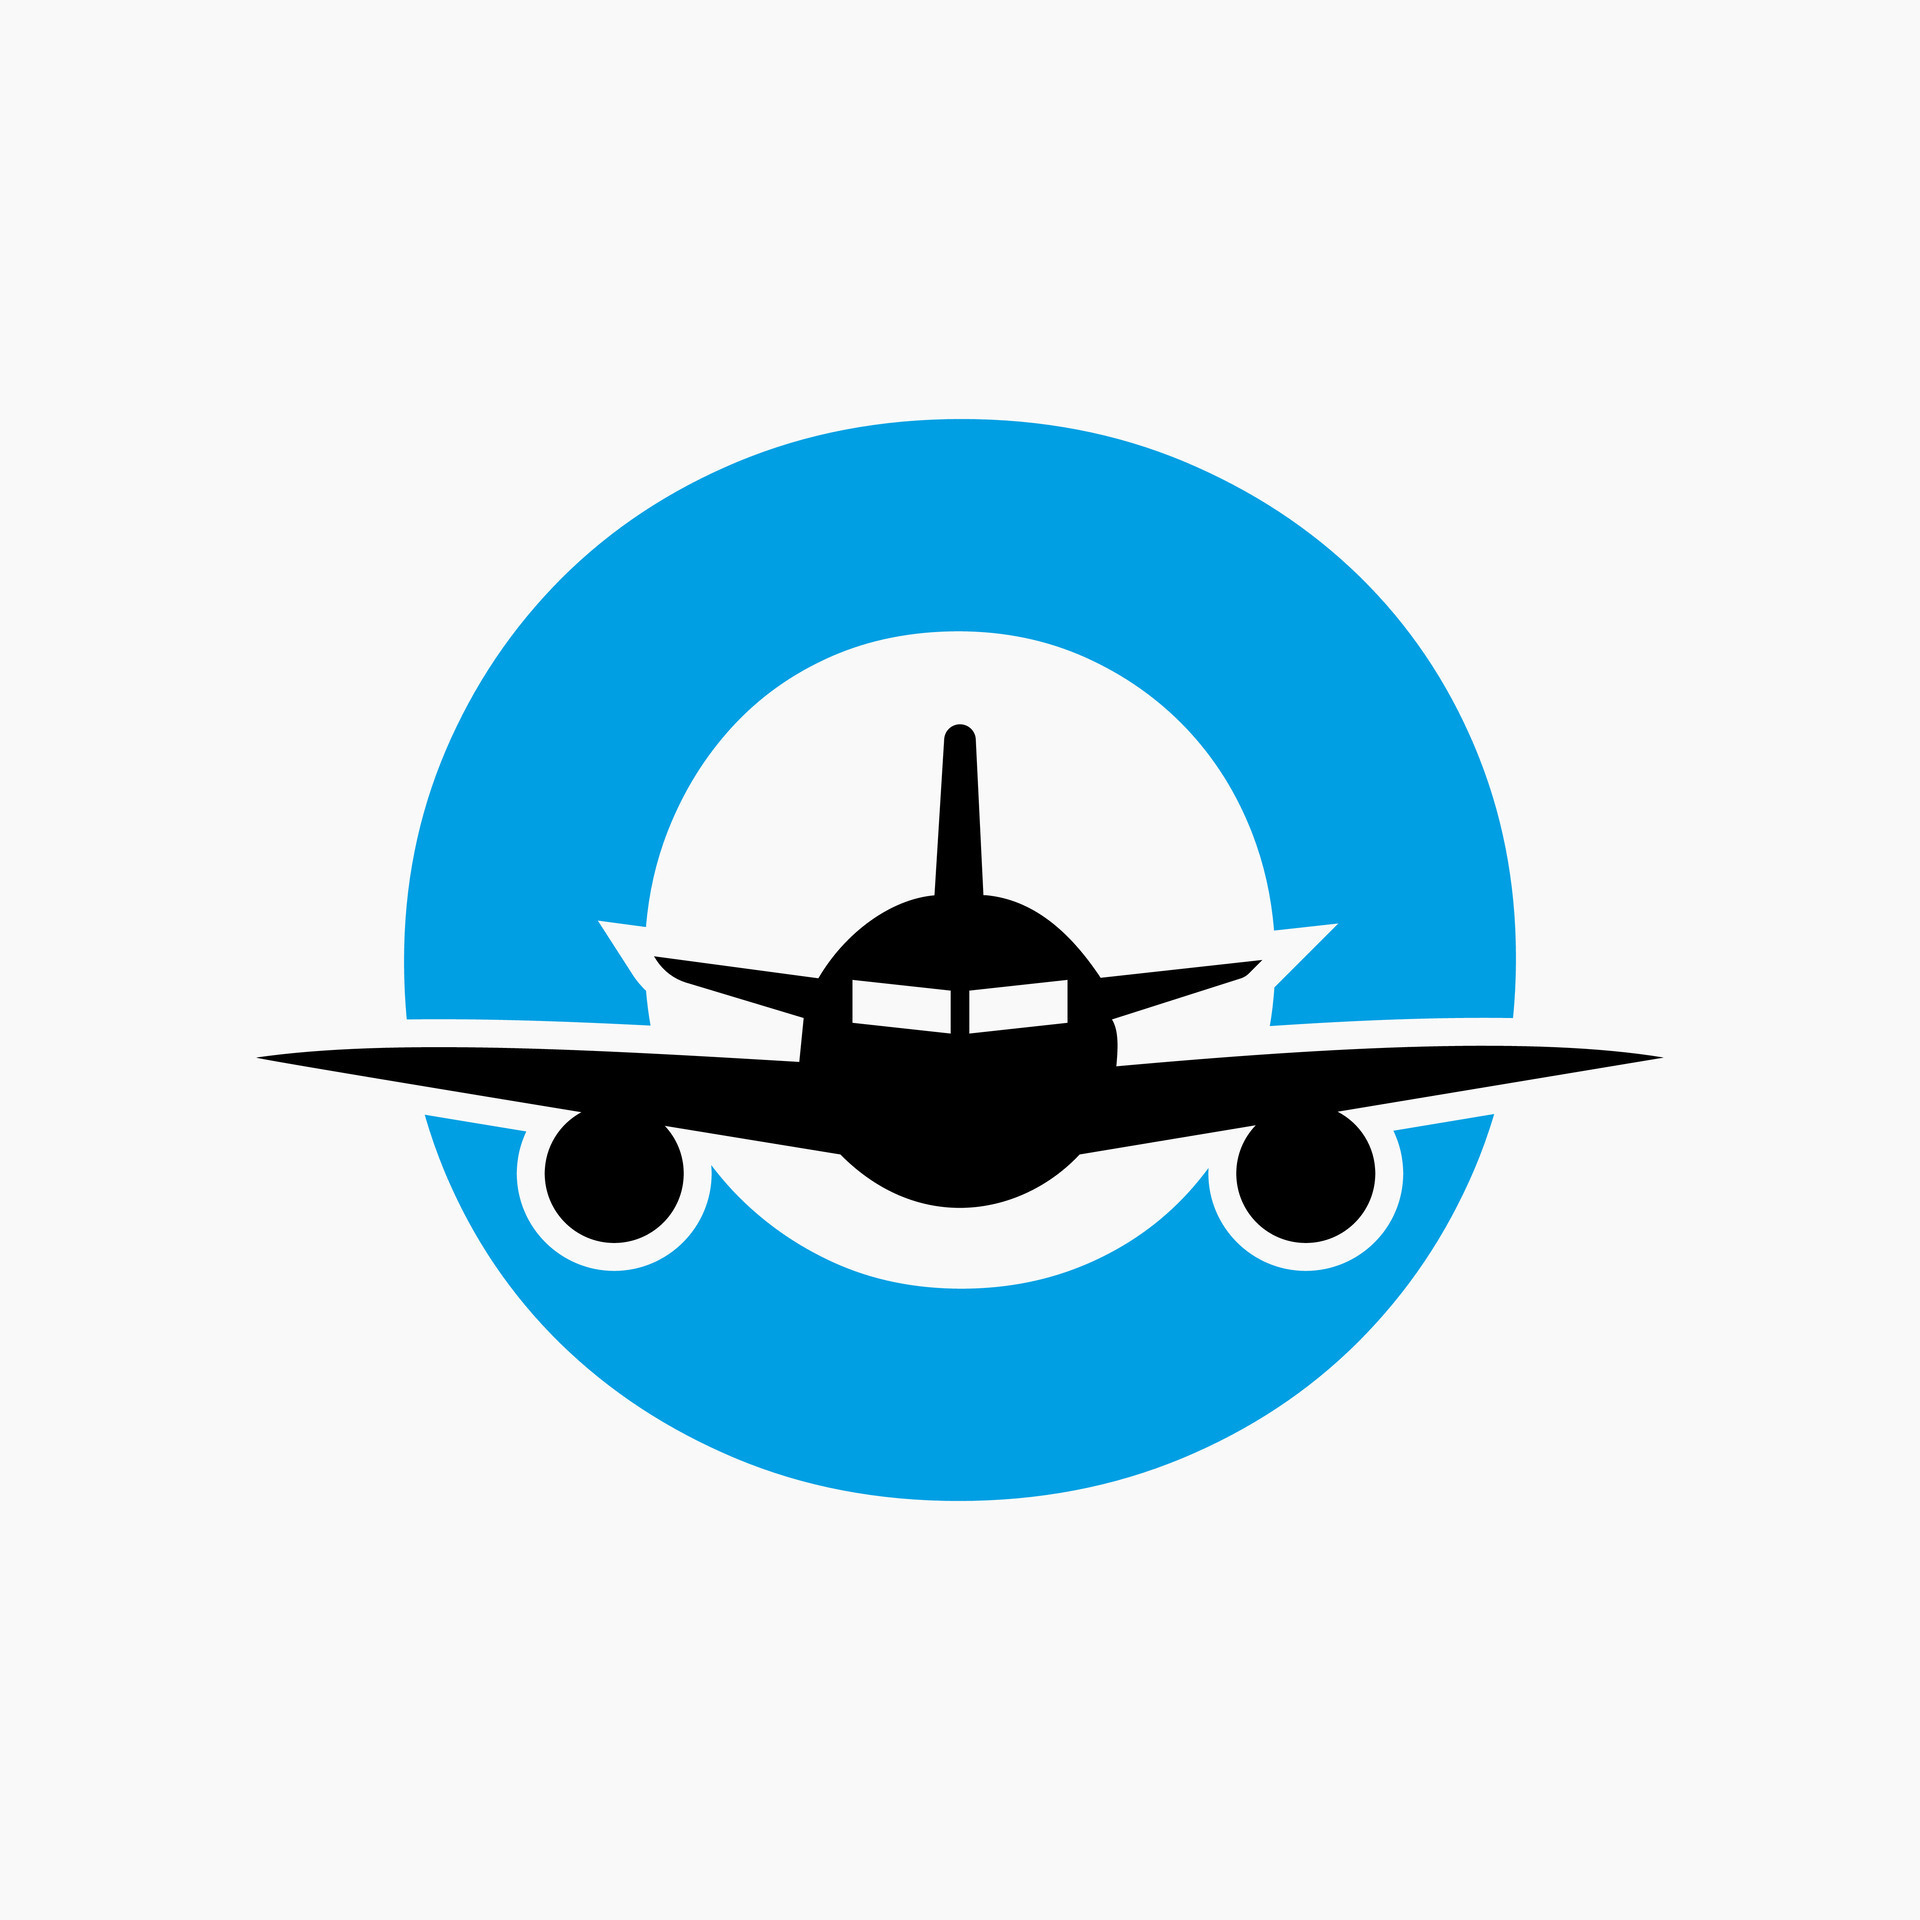 Initial Letter O Travel Logo Concept With Flying Air Plane Symbol ...